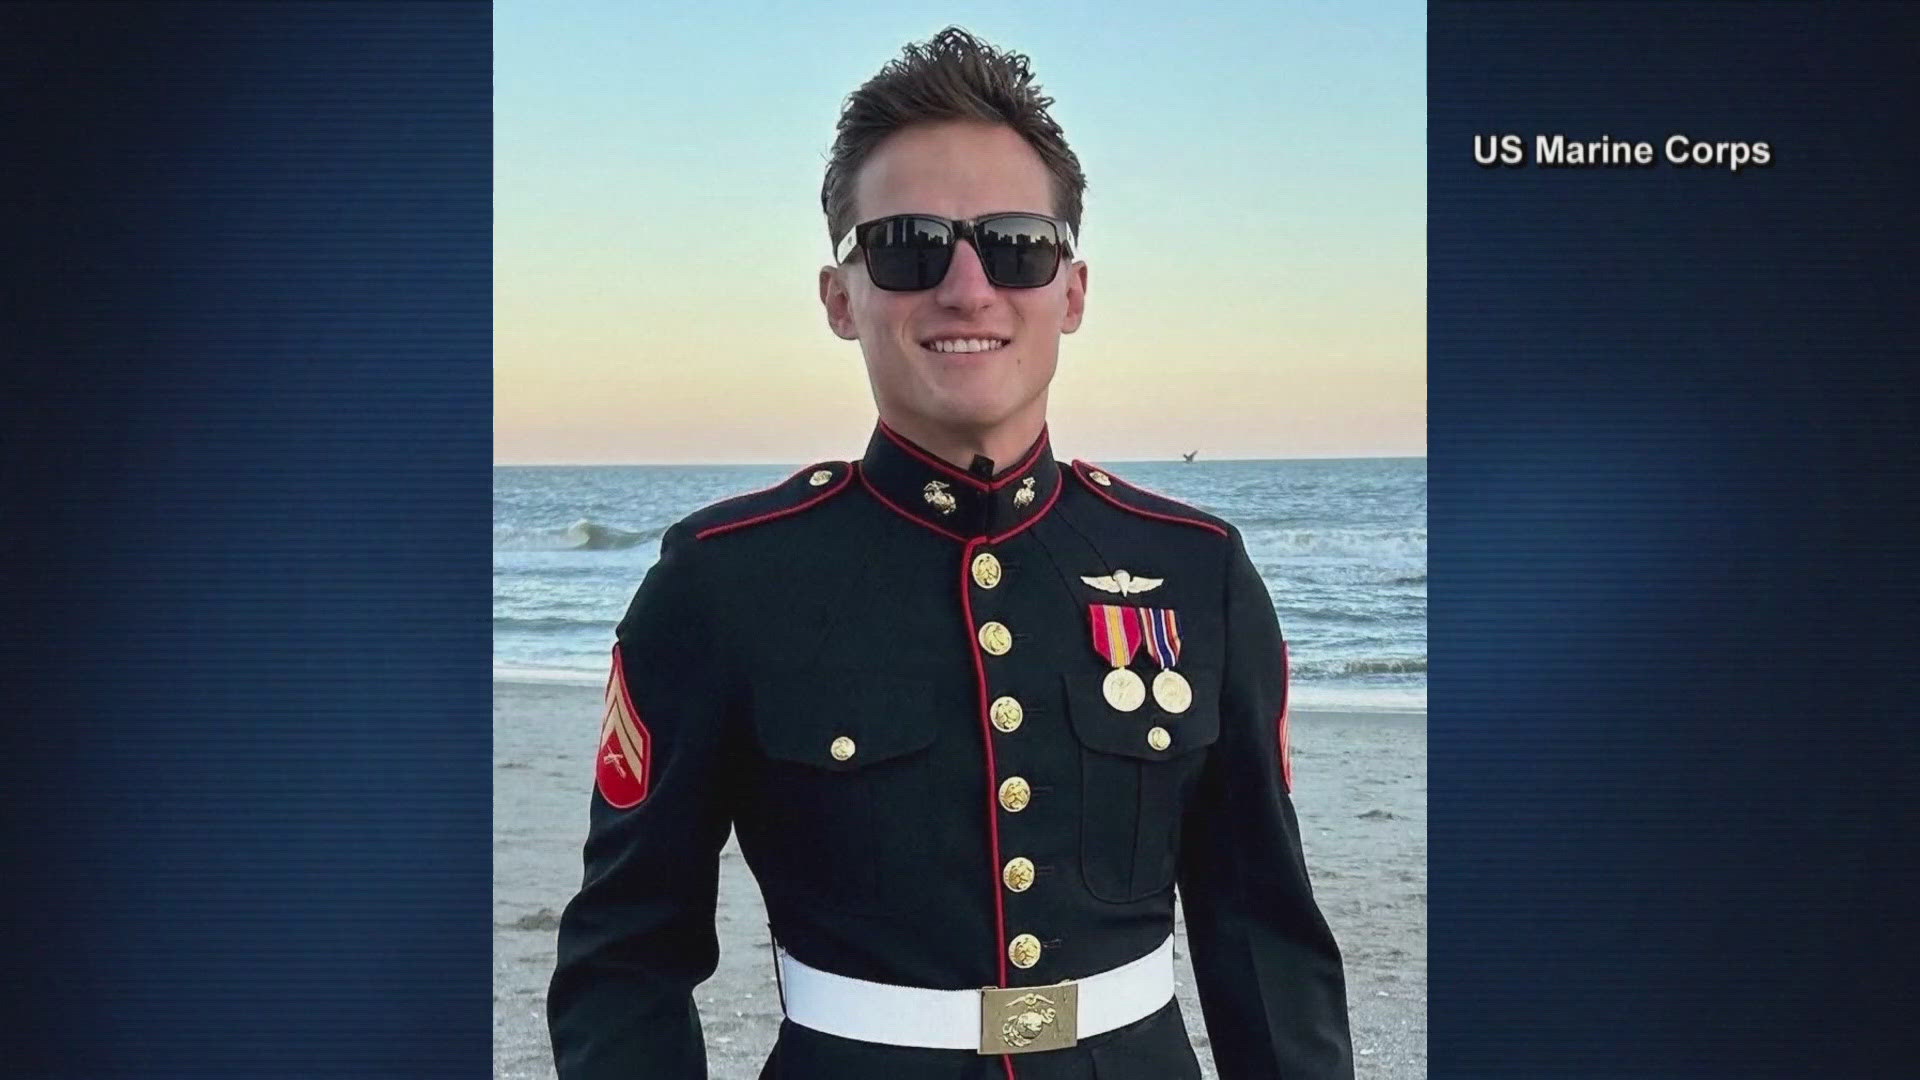 A U.S. Marine originally from Missouri died on Thursday in a training accident near Camp Lejeune in North Carolina. His family remembers his life and copes.